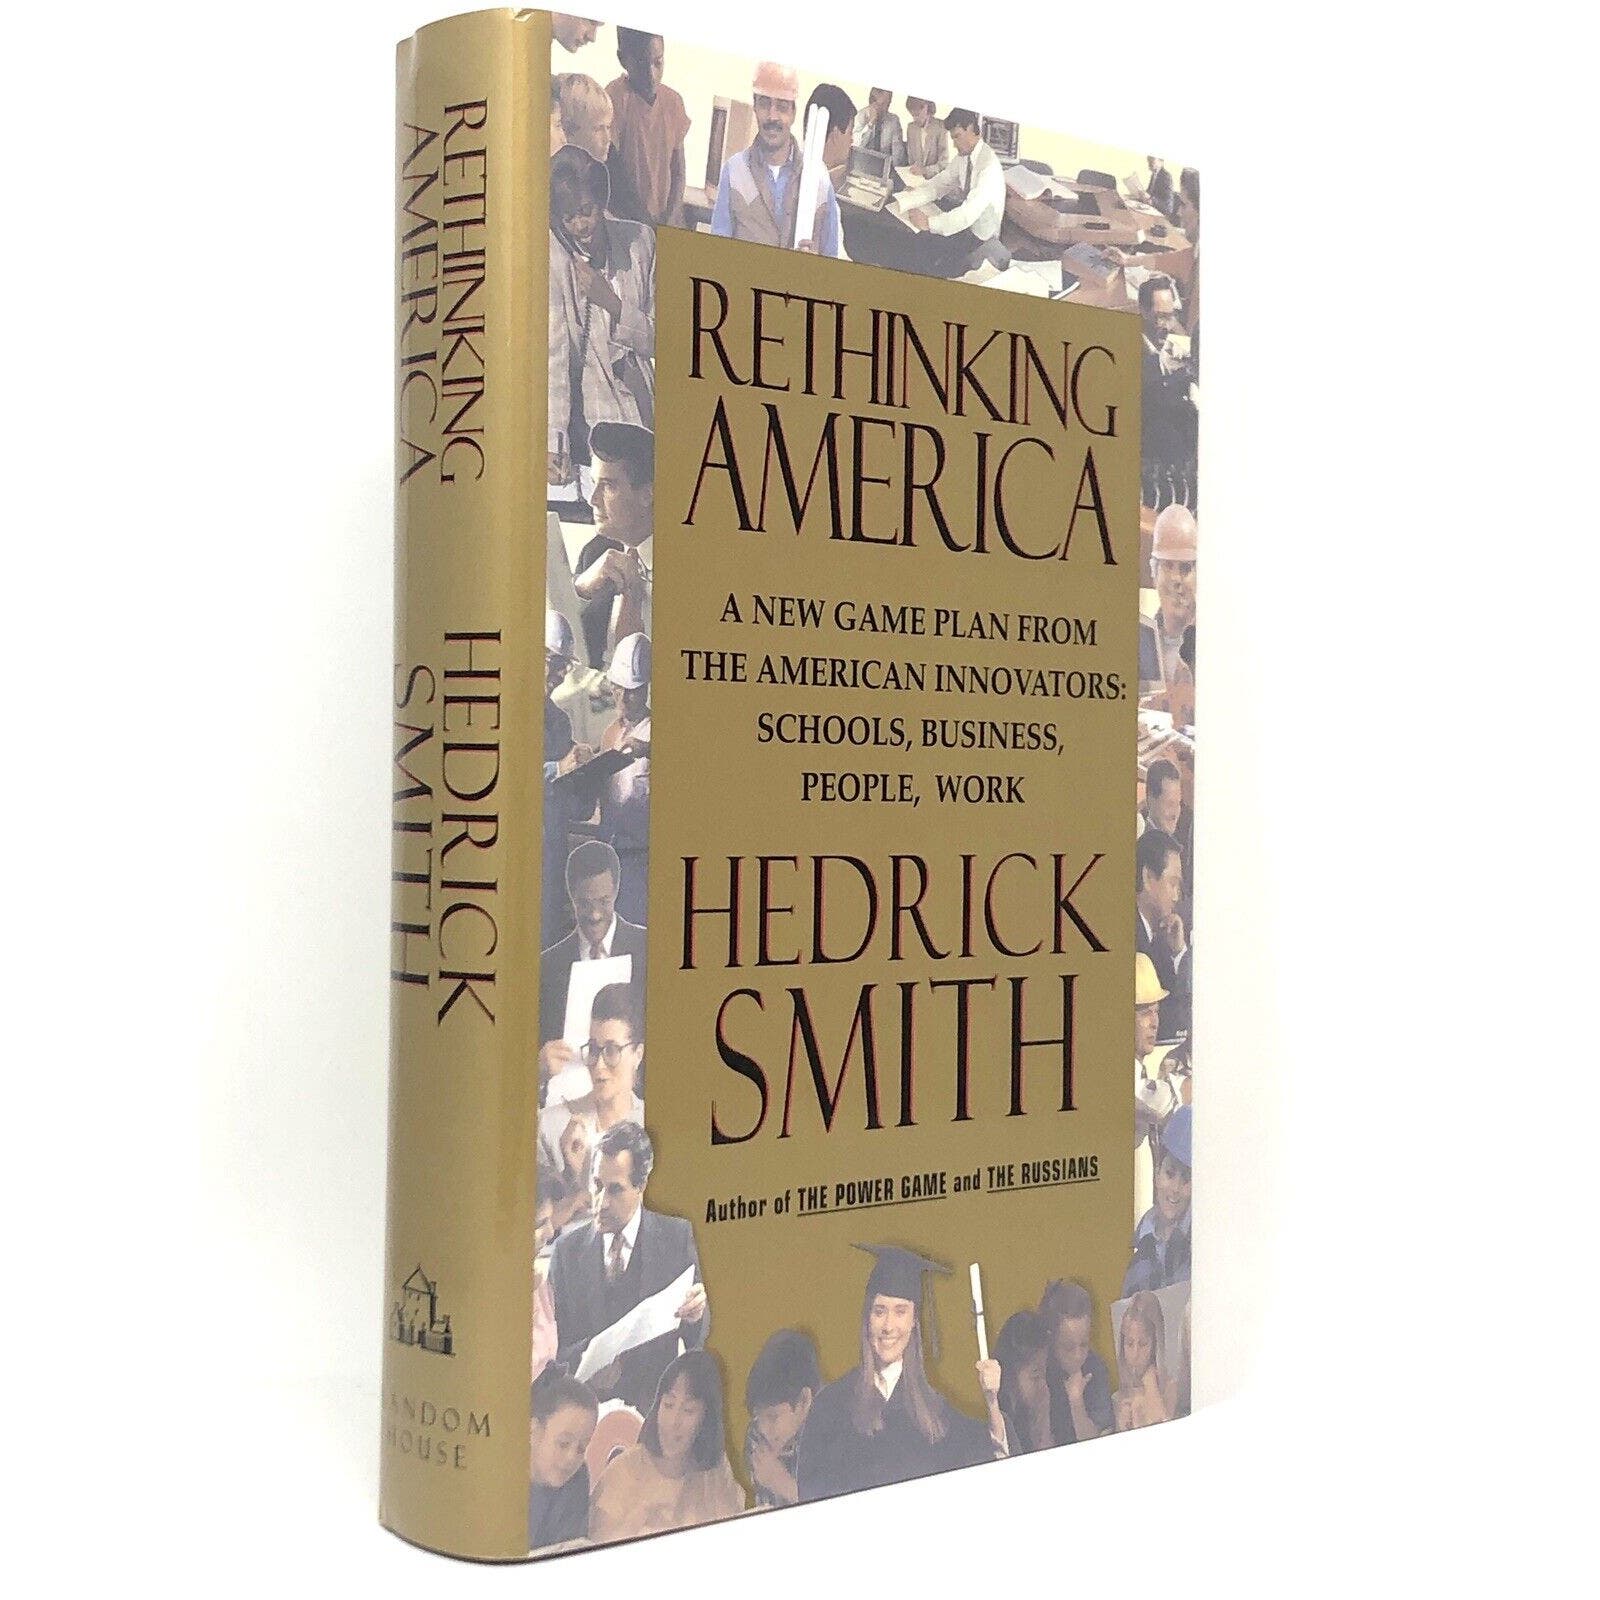 (Signed/Inscription) Rethinking America by Hedrick Smith - Uncle Buddy's Beard & Used Books